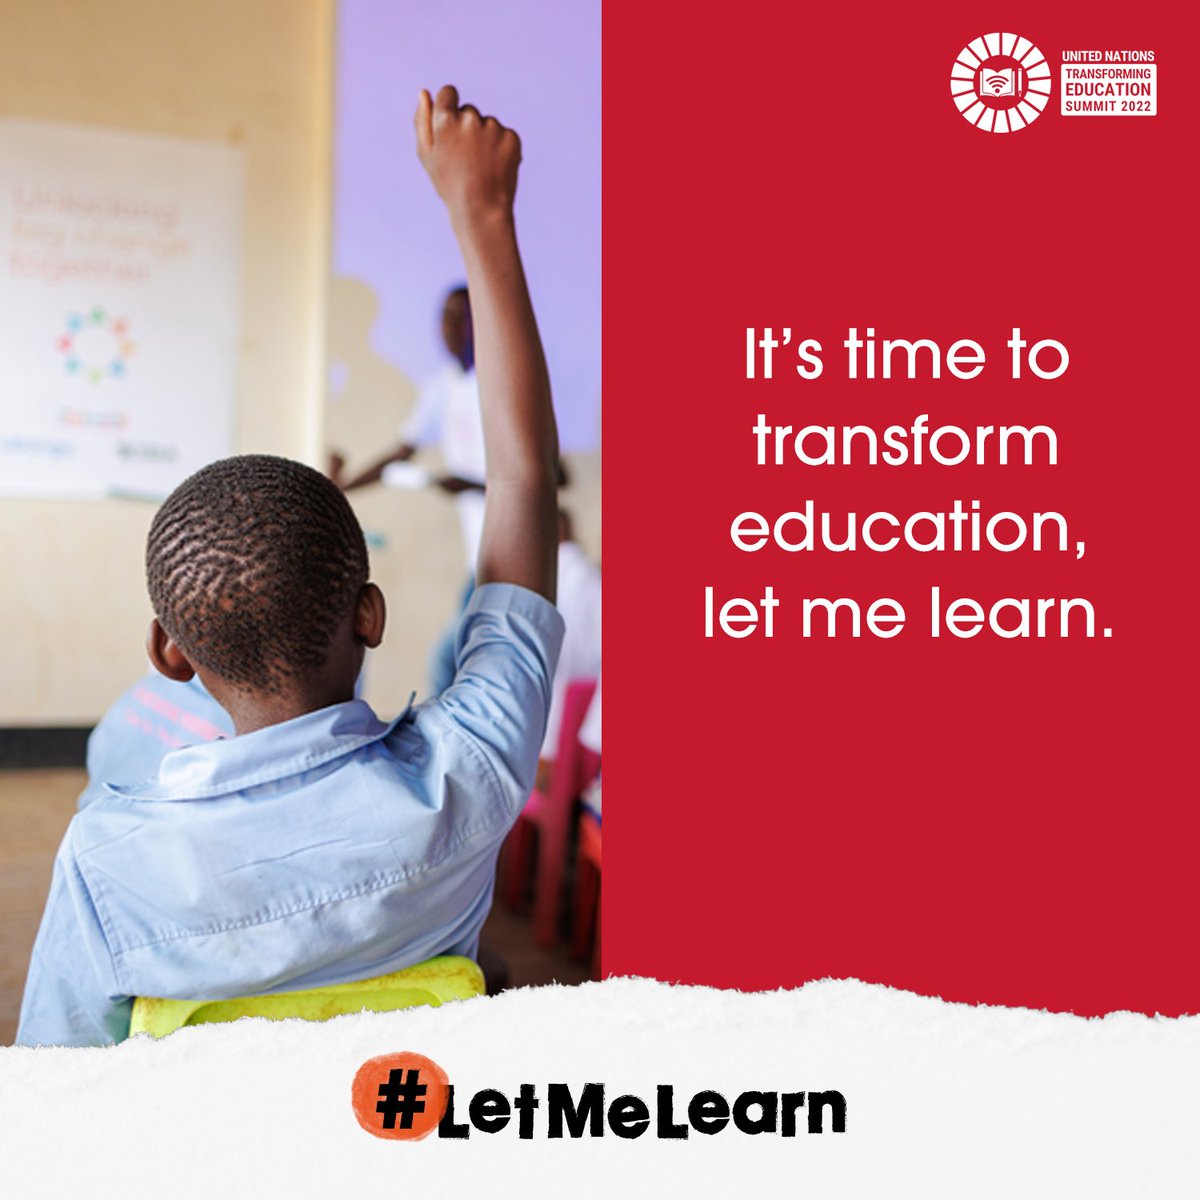 It’s time to end learning gaps and create equal learning opportunities. #TransformingEducation requires leaders to listen to young people demanding: #LetMeLearn.